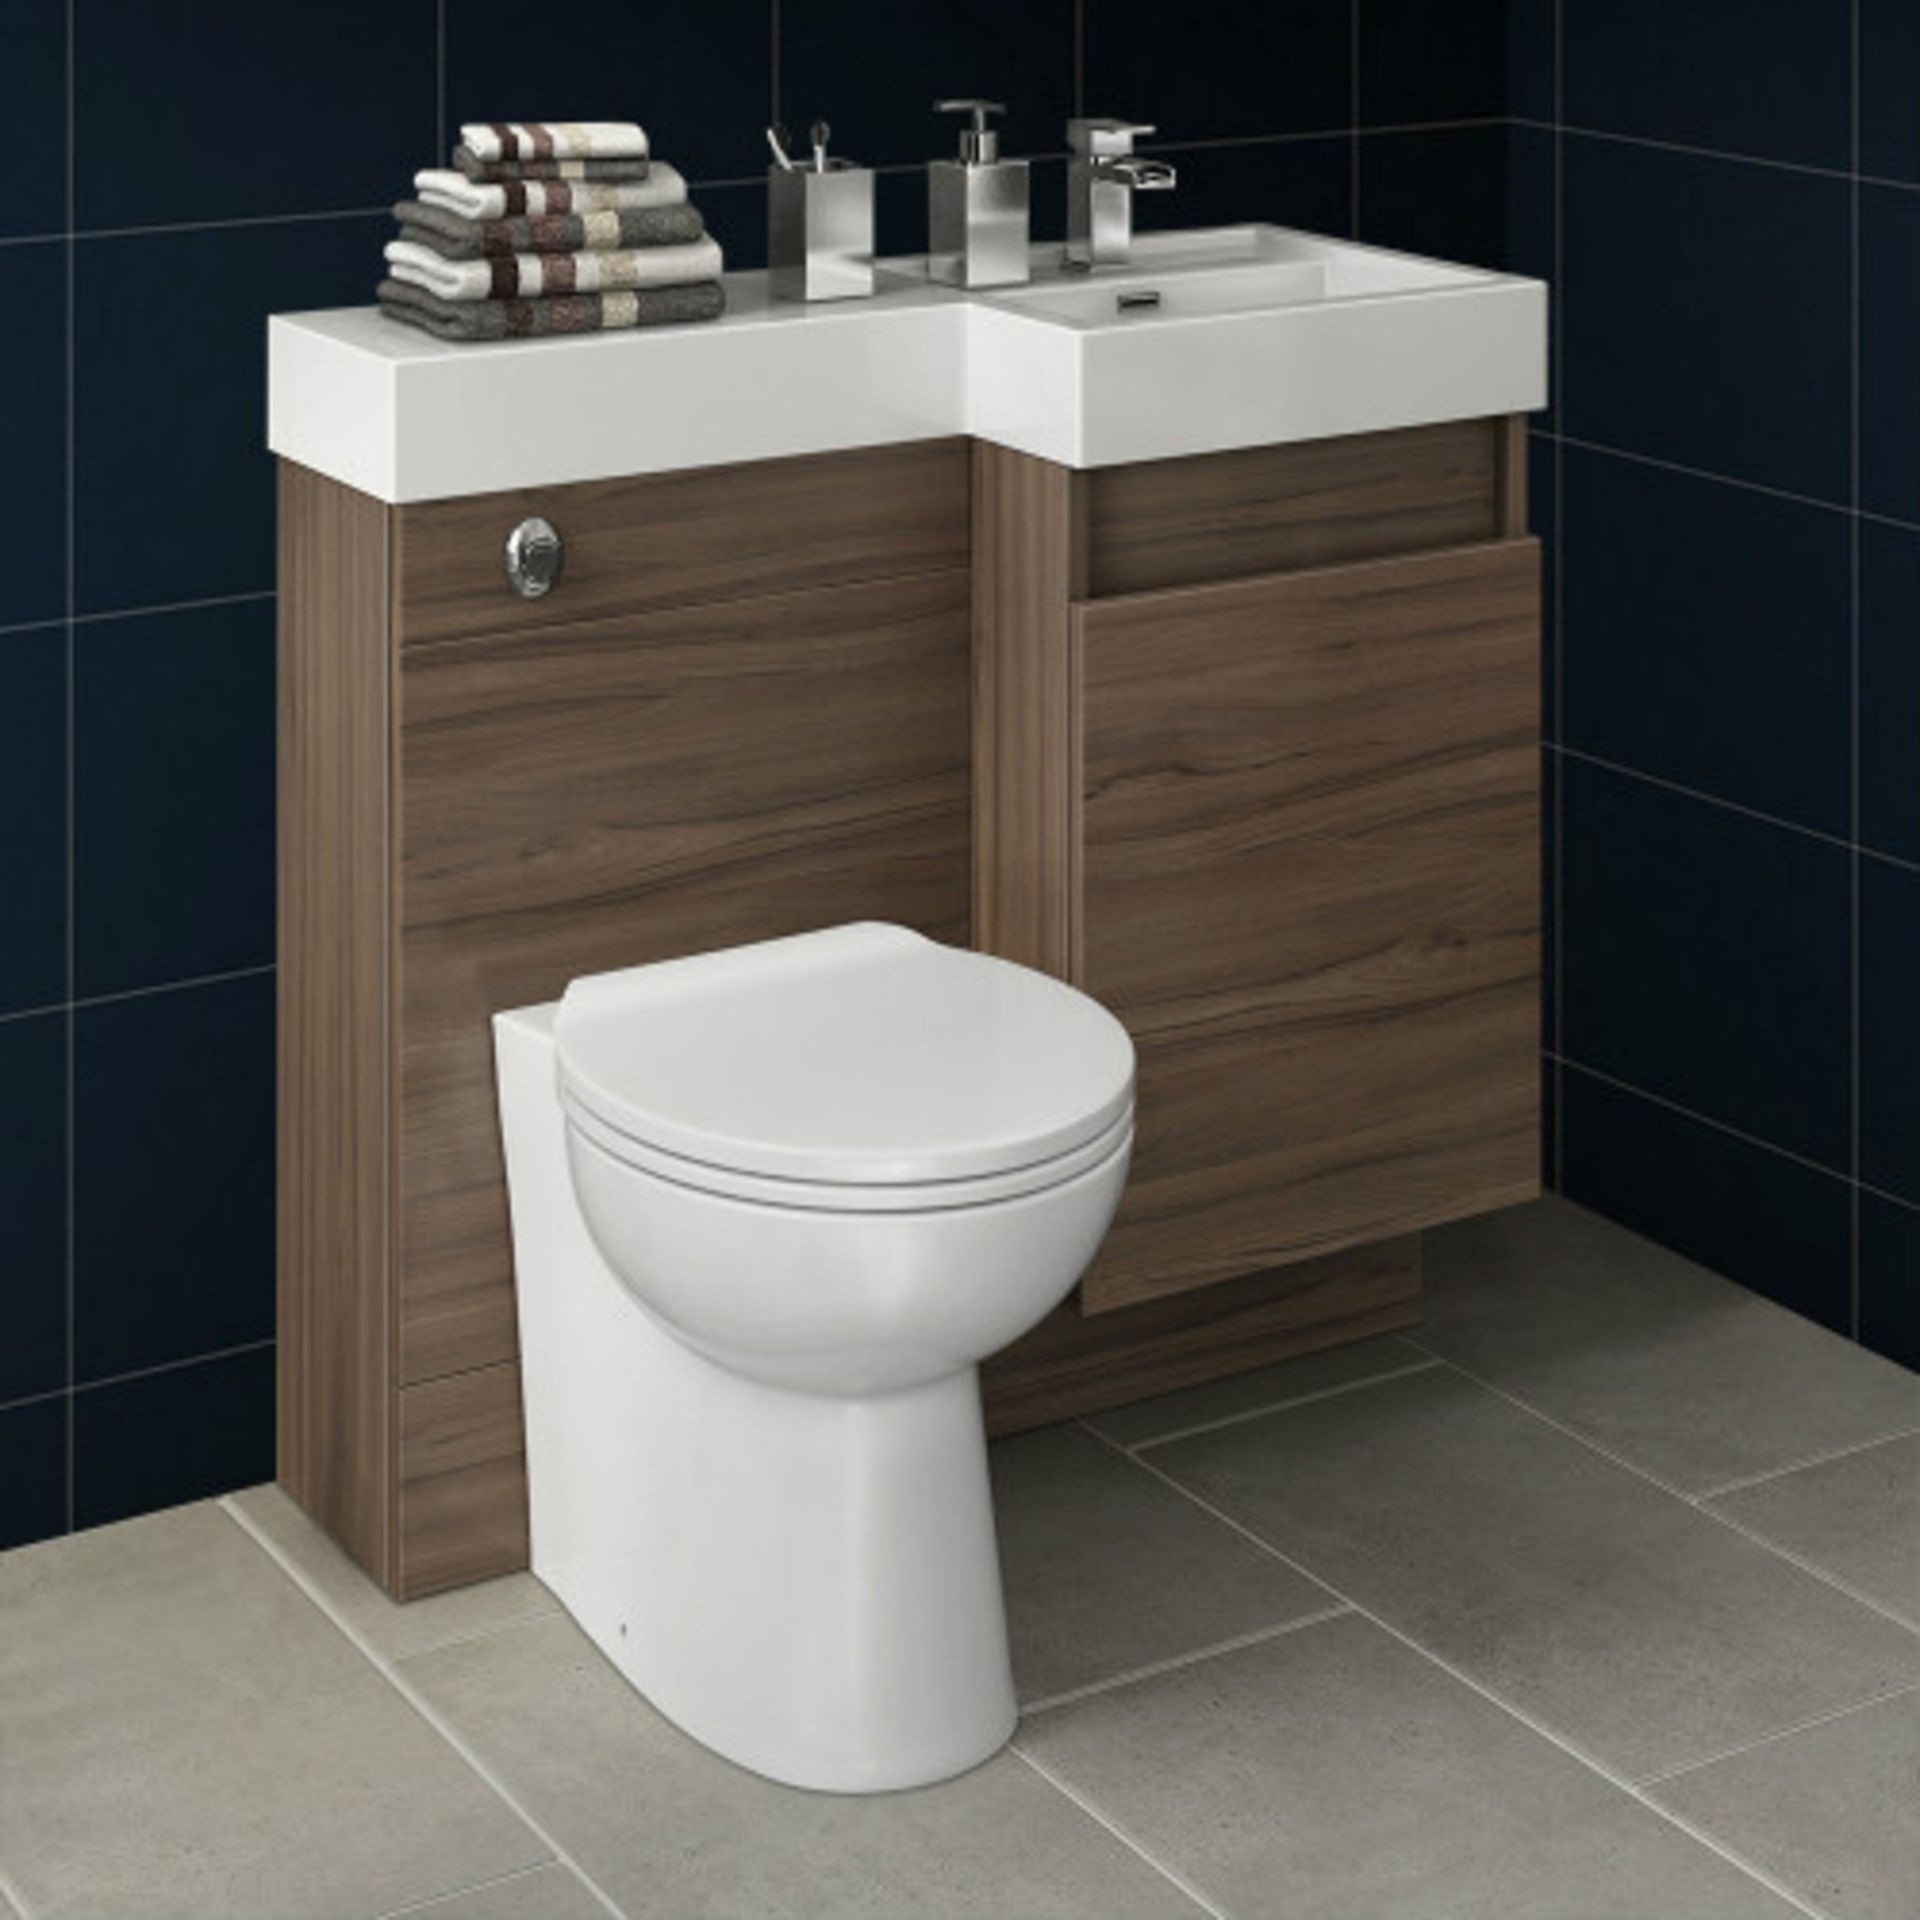 906mm Olympia Walnut Effect Drawer Vanity Unit Right with Quartz Pan. RRP £999.99. Comes compl...